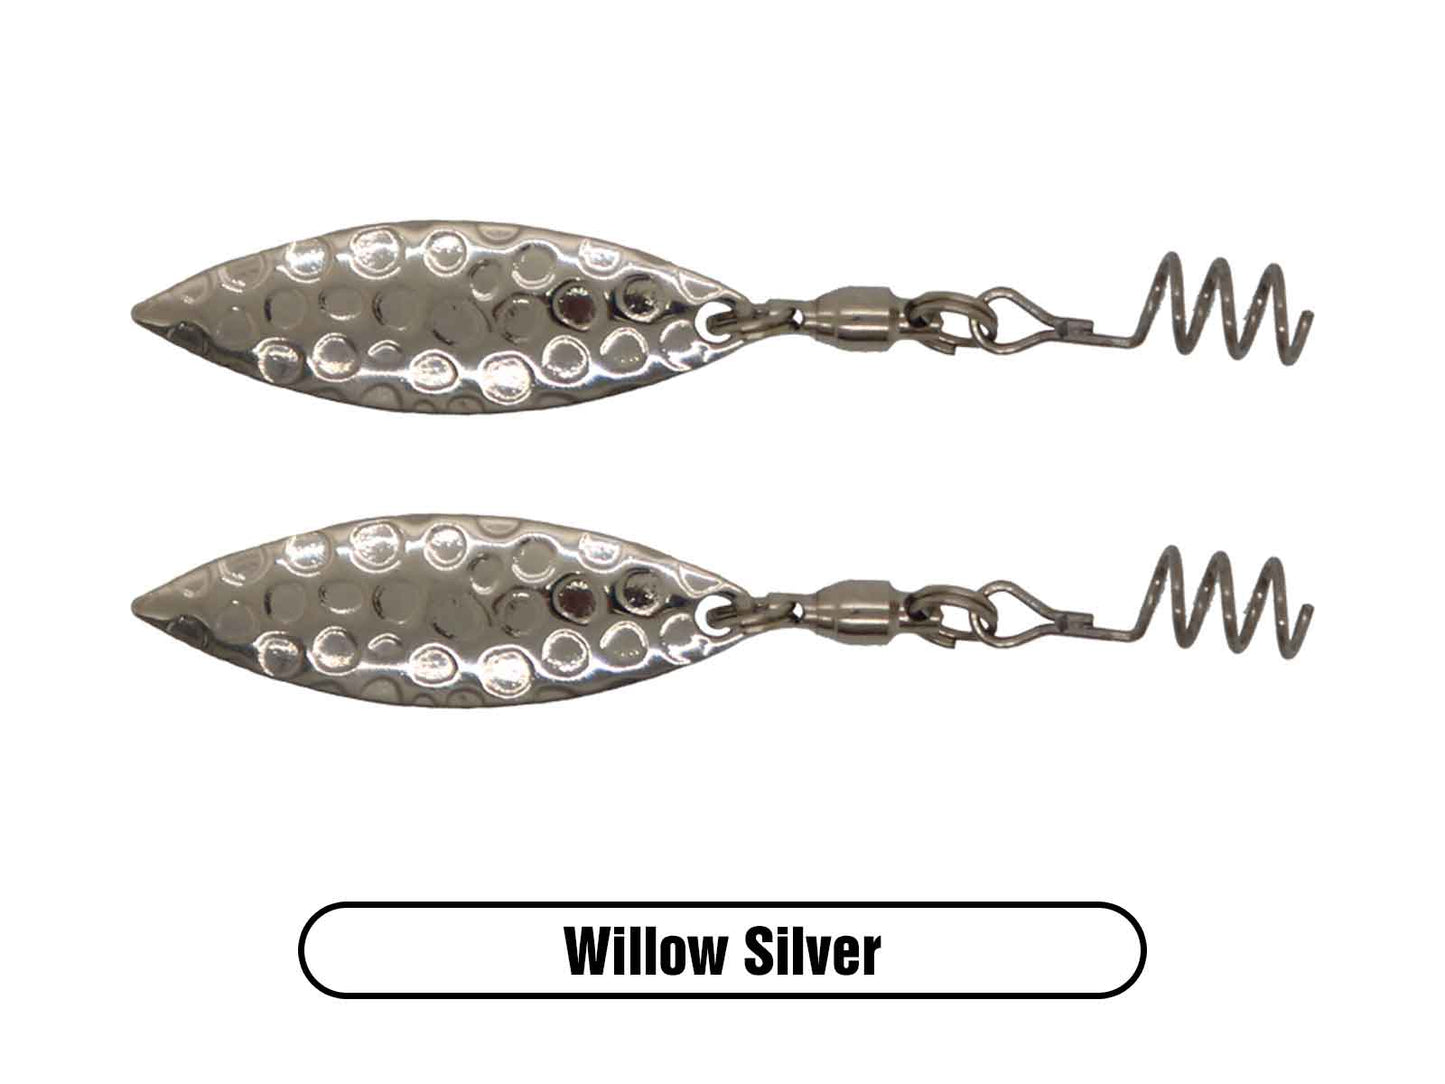 Silver Willow Blade Spin for Largemouth Bass Fishing, Smallmouth Bass Fishing and Walleye Fishing Lure